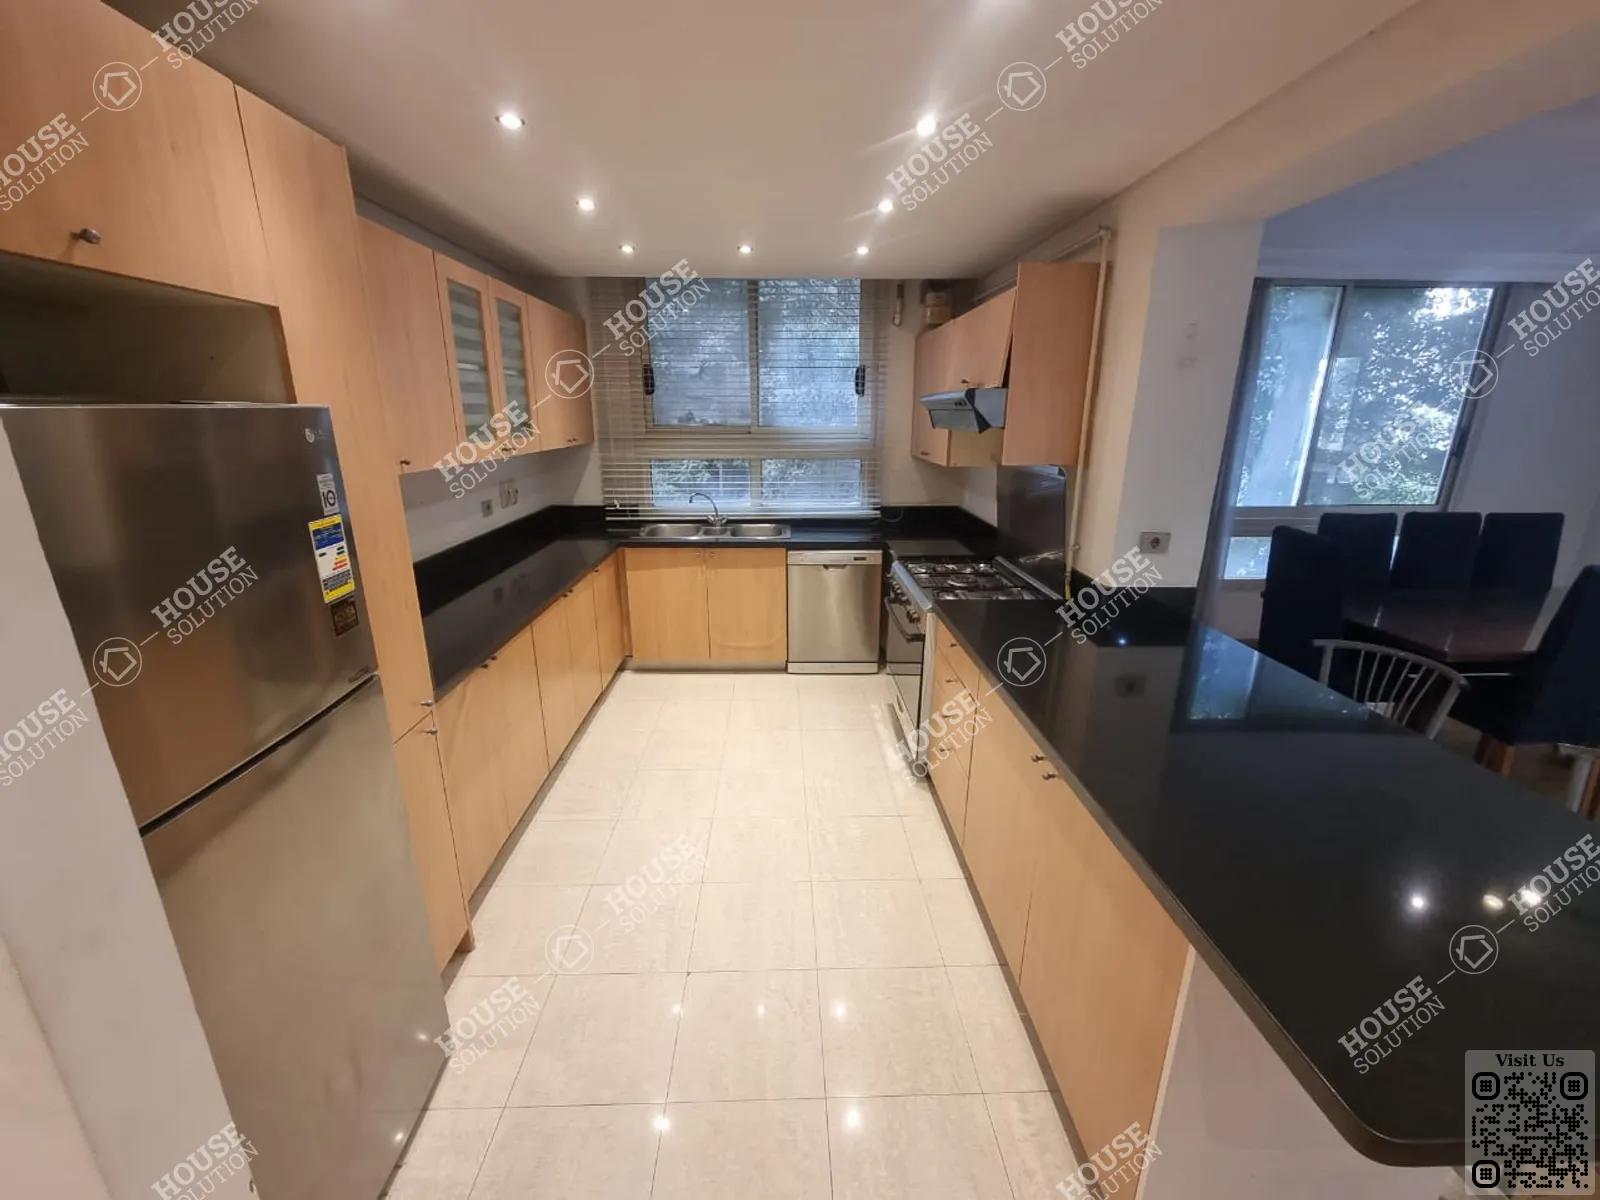 KITCHEN  @ Apartments For Rent In Maadi Maadi Sarayat Area: 245 m² consists of 4 Bedrooms 4 Bathrooms Modern furnished 5 stars #5769-1